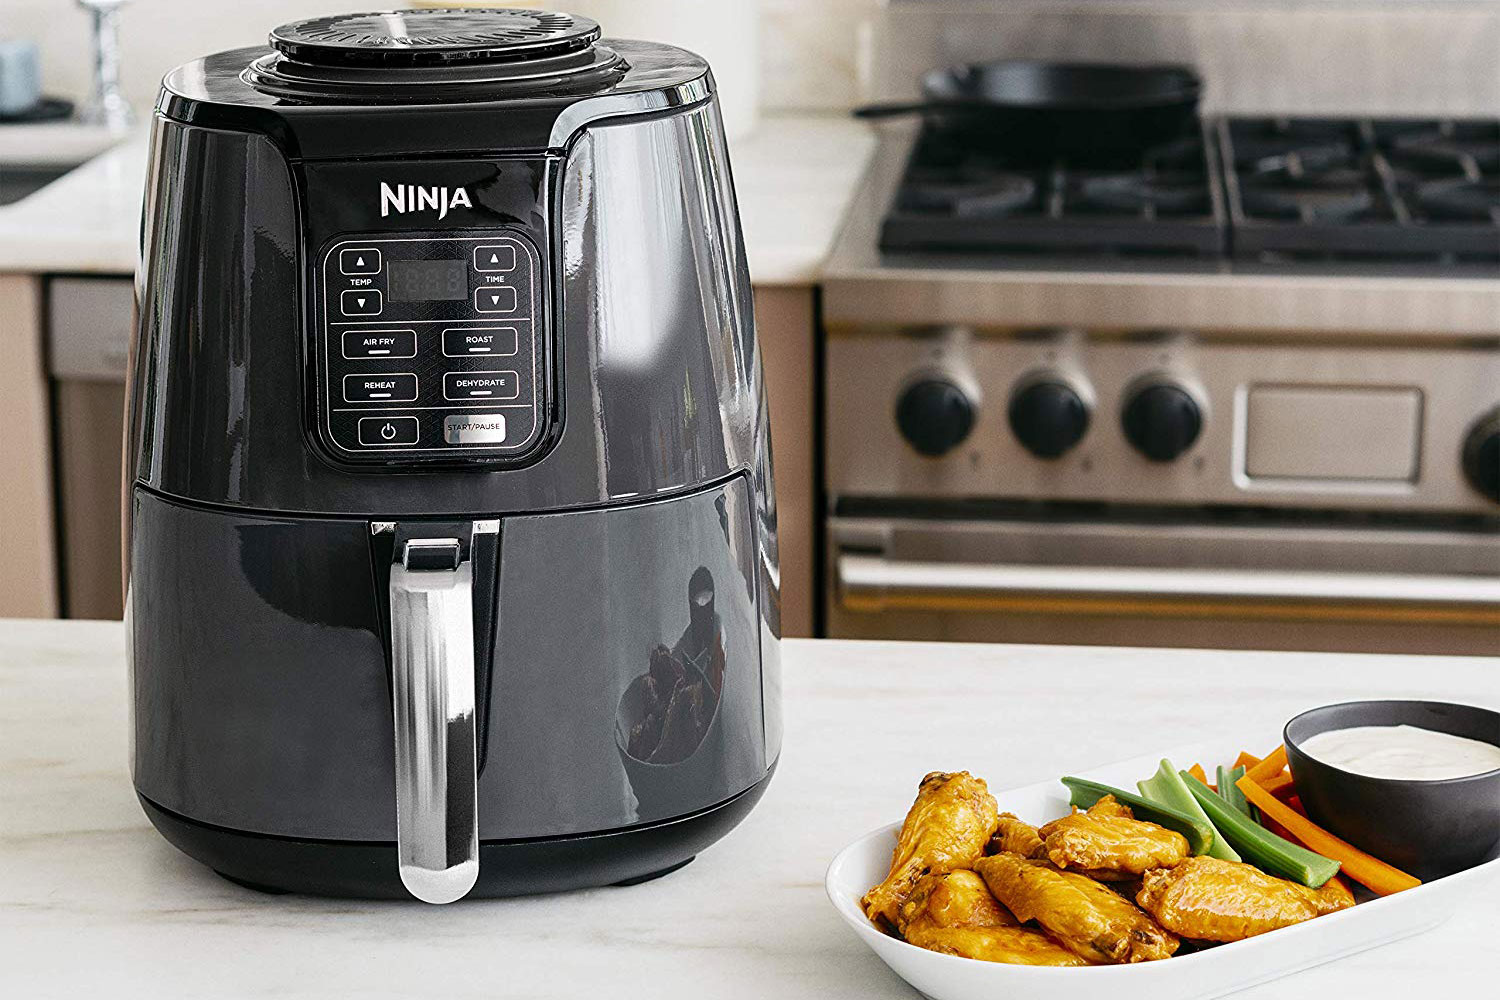 The Ninja 4-Quart Air Fryer with cooked food at the side.